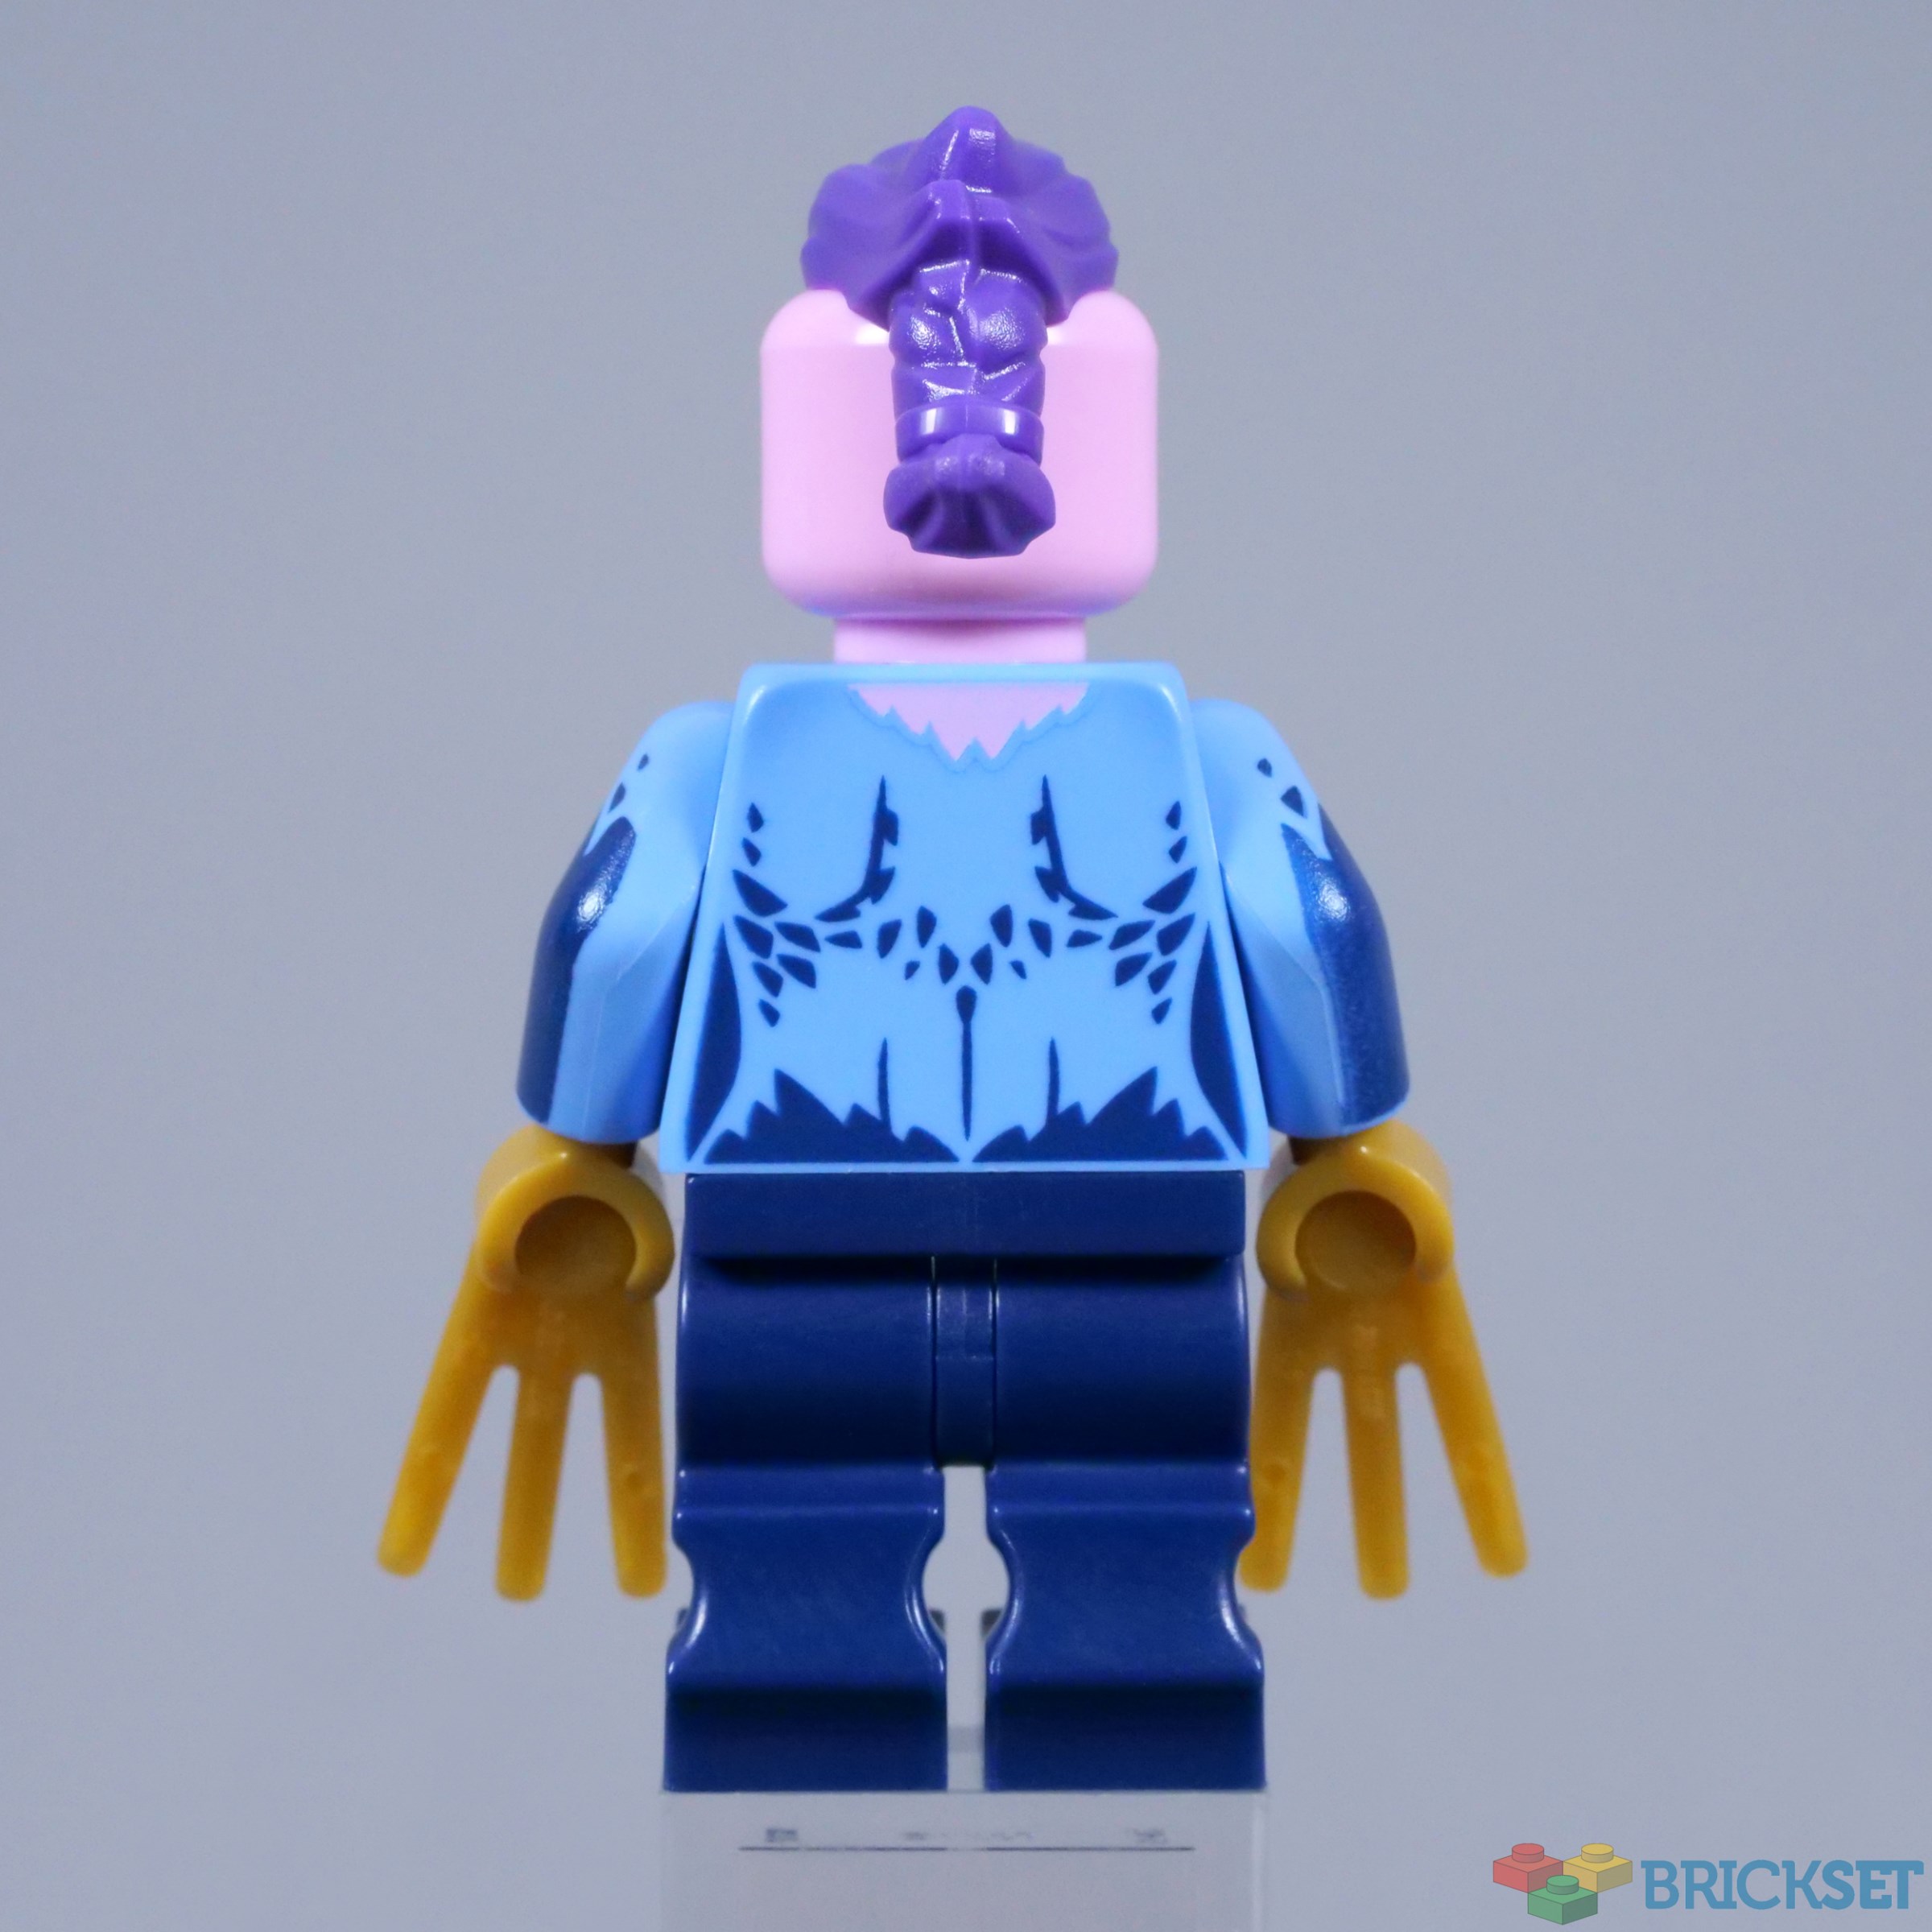 LEGO 71045 Collectible Minifigures Series 25; is this series the GOAT  (Greatest Of All Time)? [Review] - The Brothers Brick